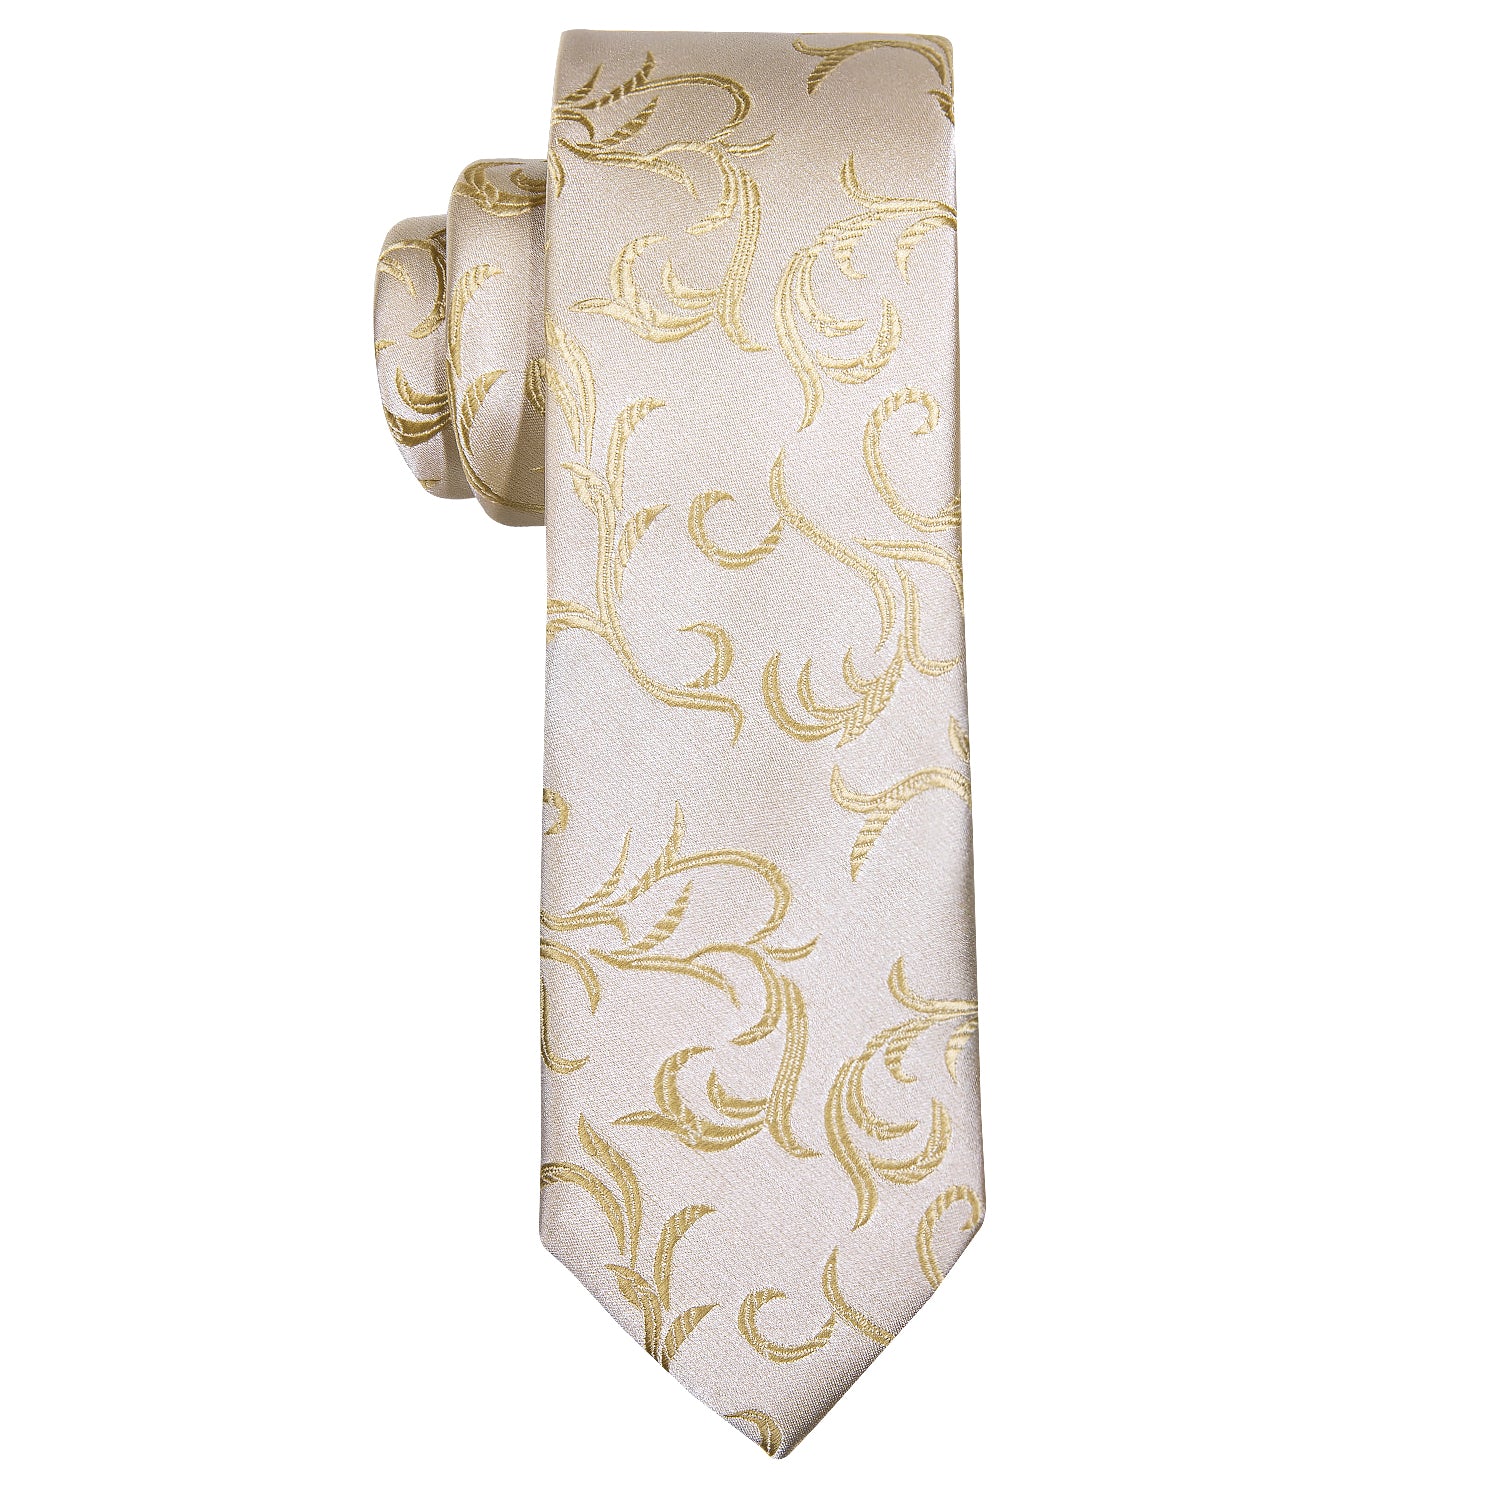 Barry.wang Floral Tie Champagne White Children's Tie Pocket Square Set